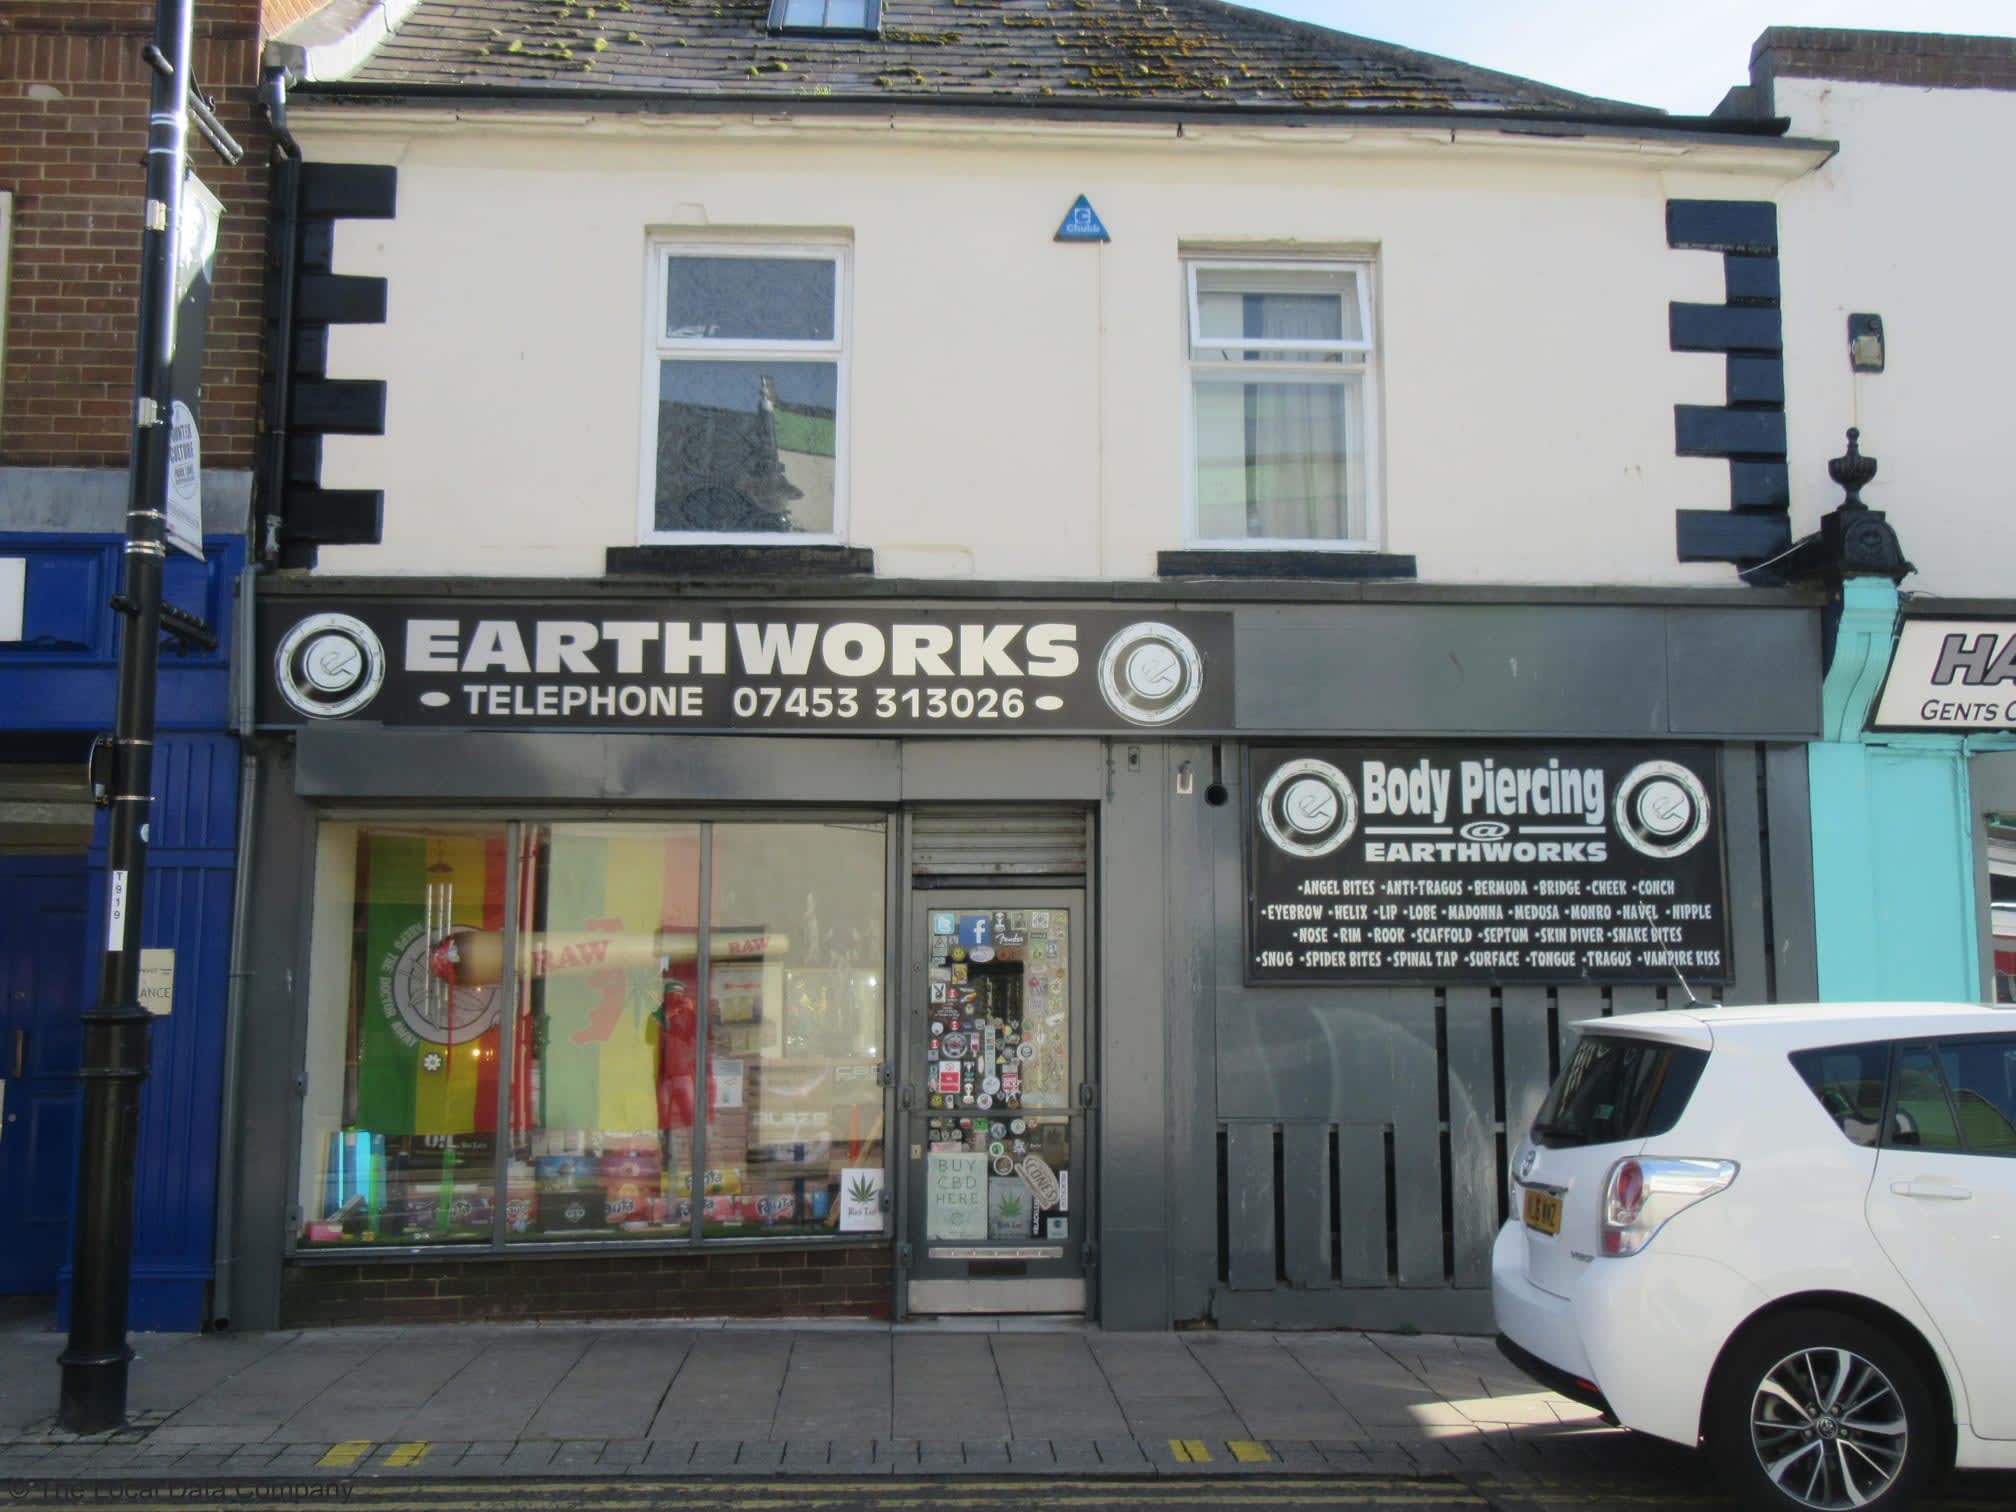 Images Earthworks